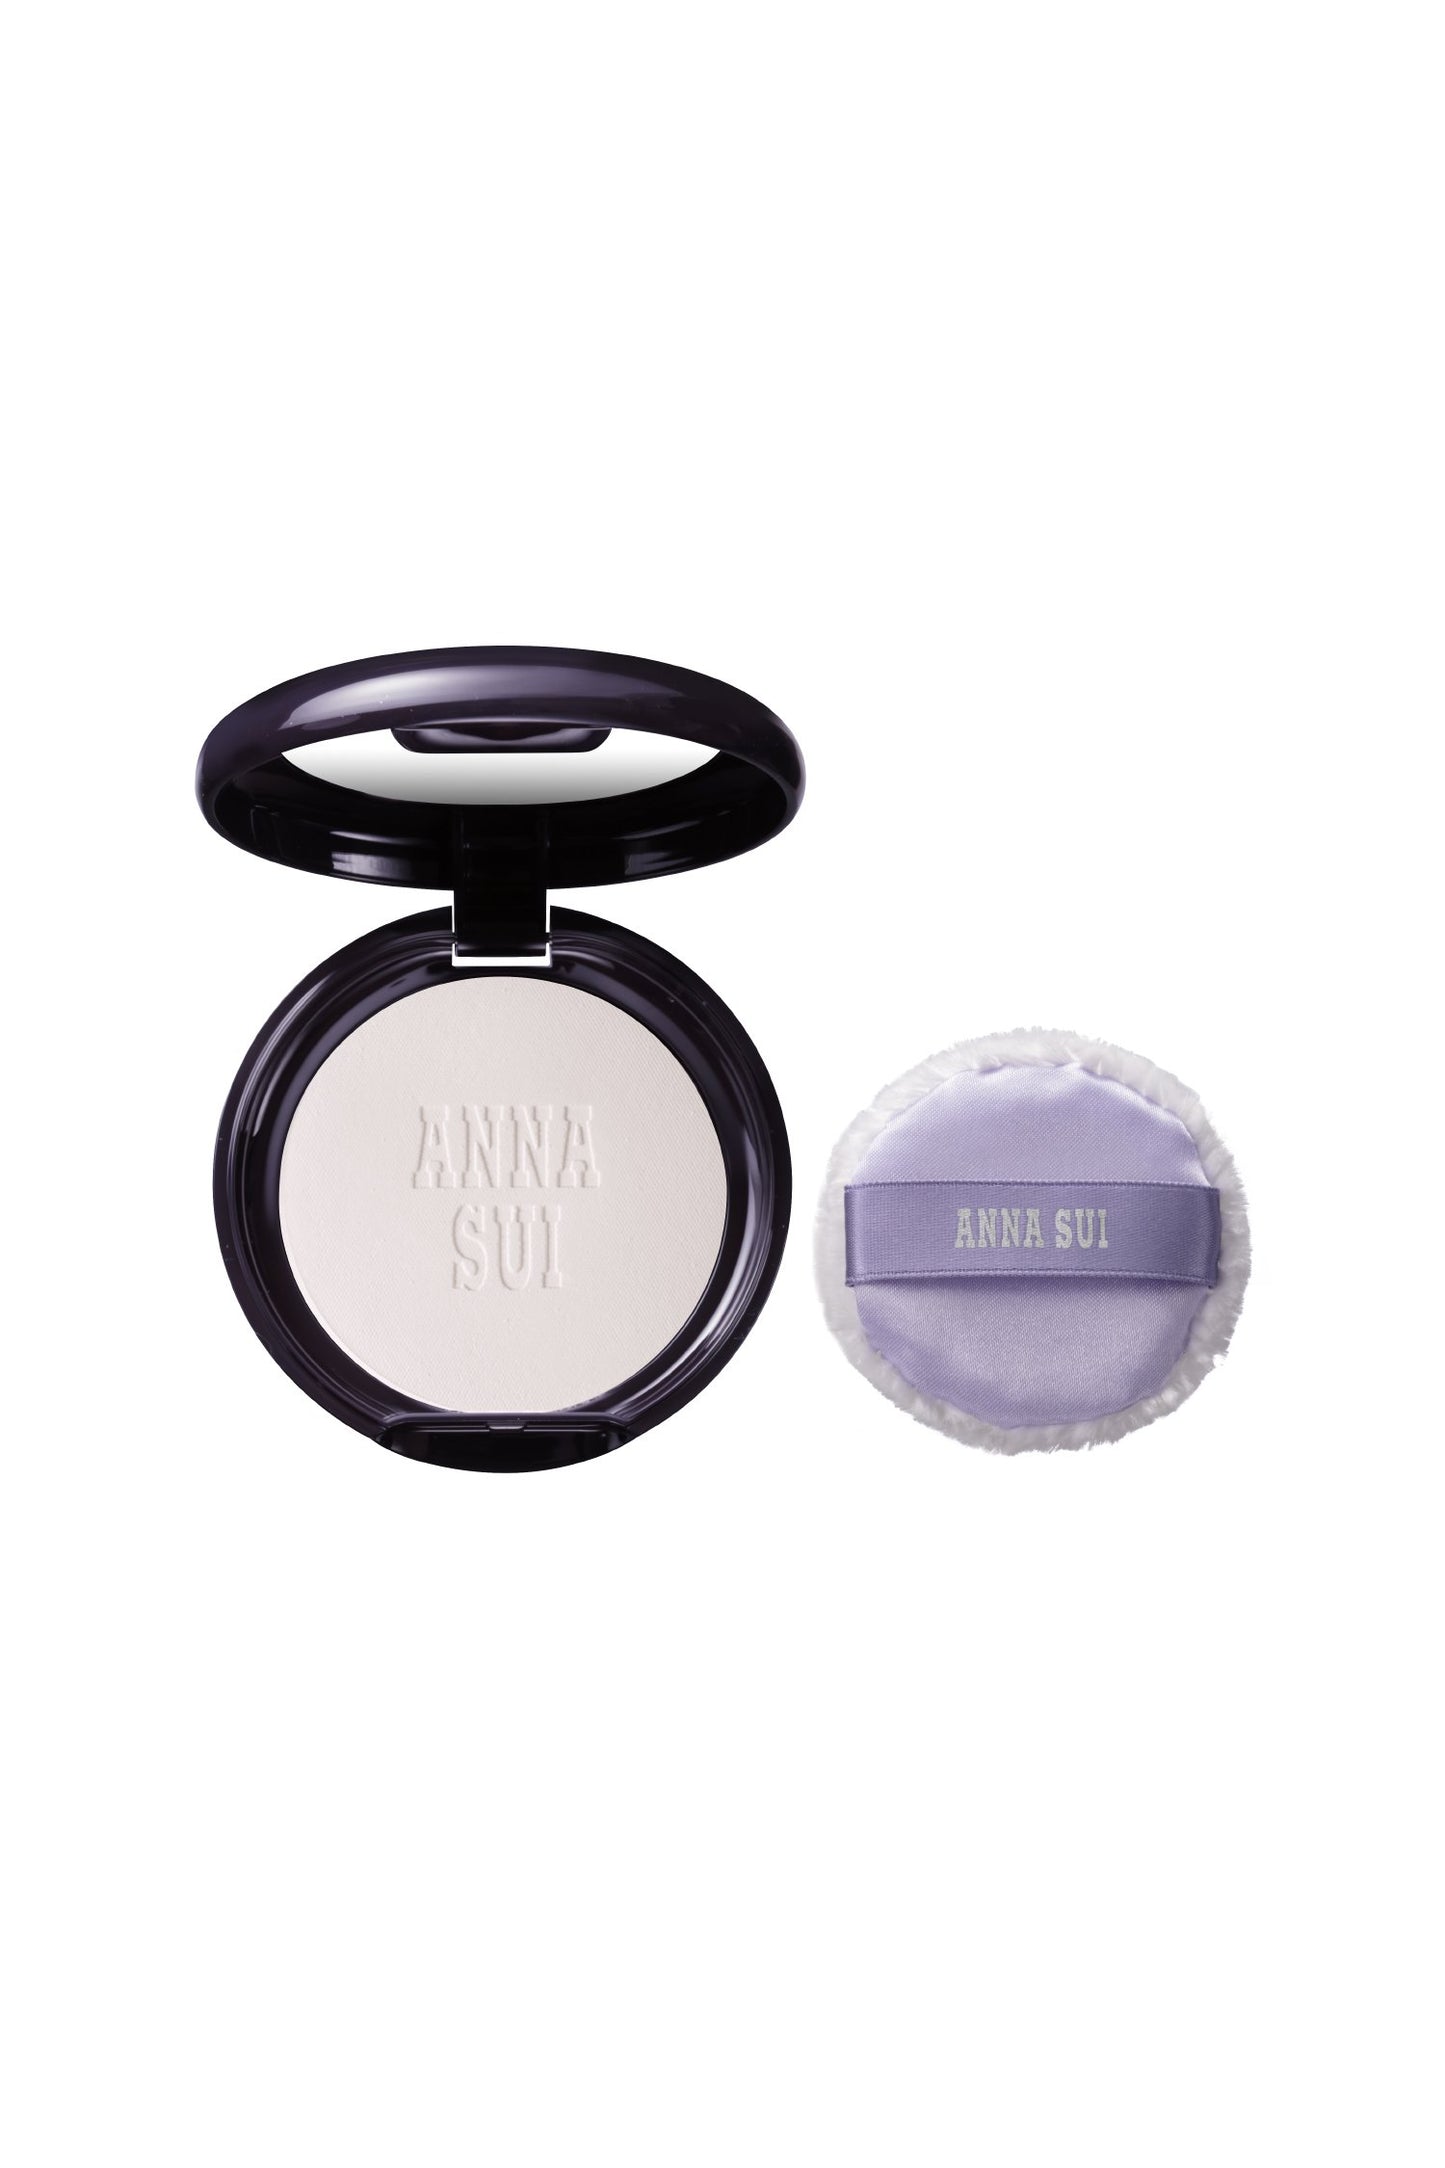 Open case of new skin-brightening powder, round, with a mirror, fluffy violet pad & Anna Sui label